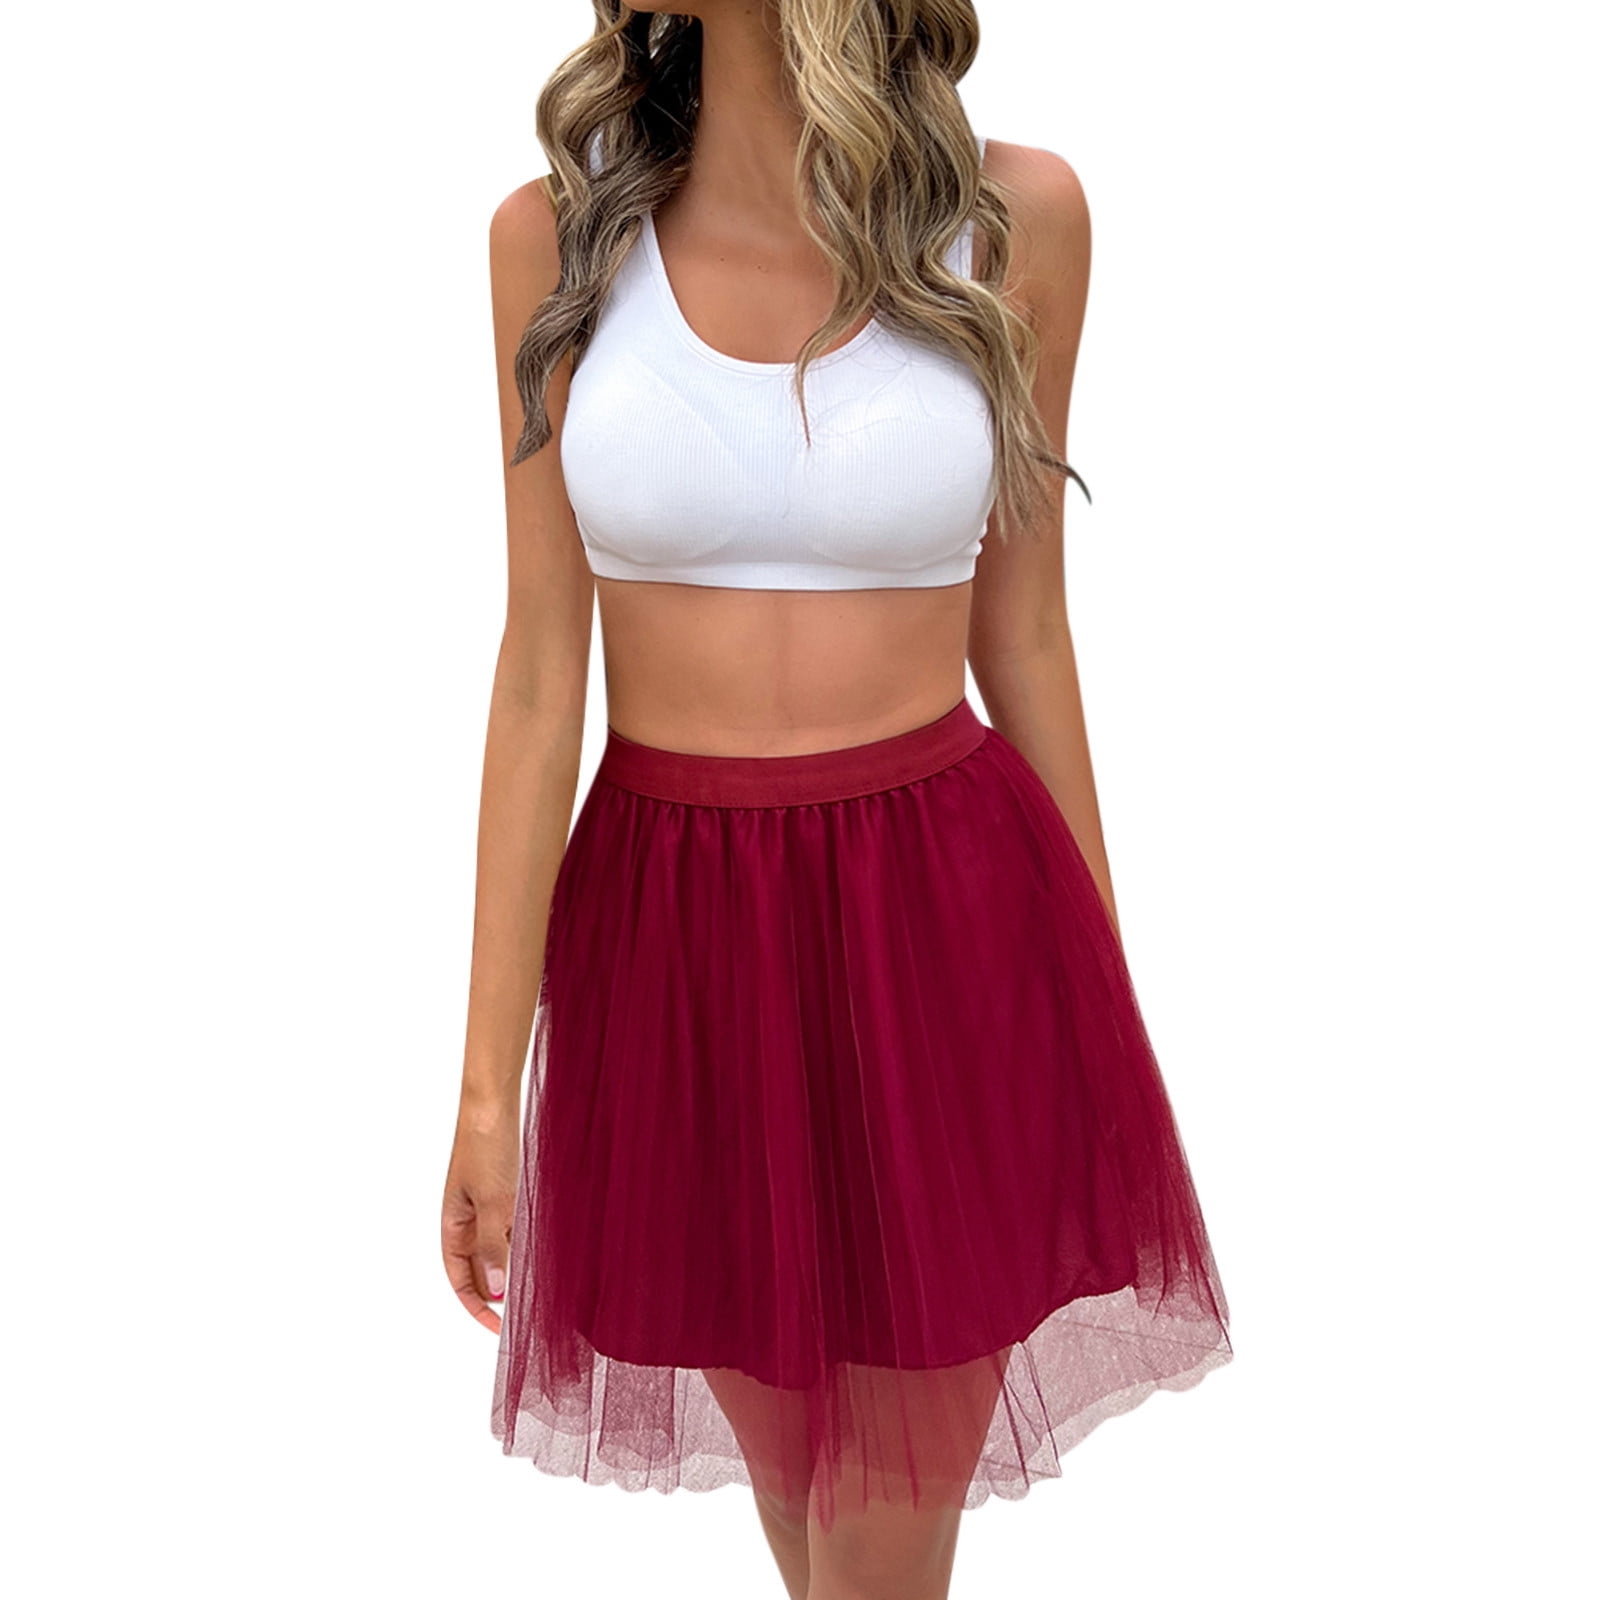 Skirts and Shorts Collection for Women